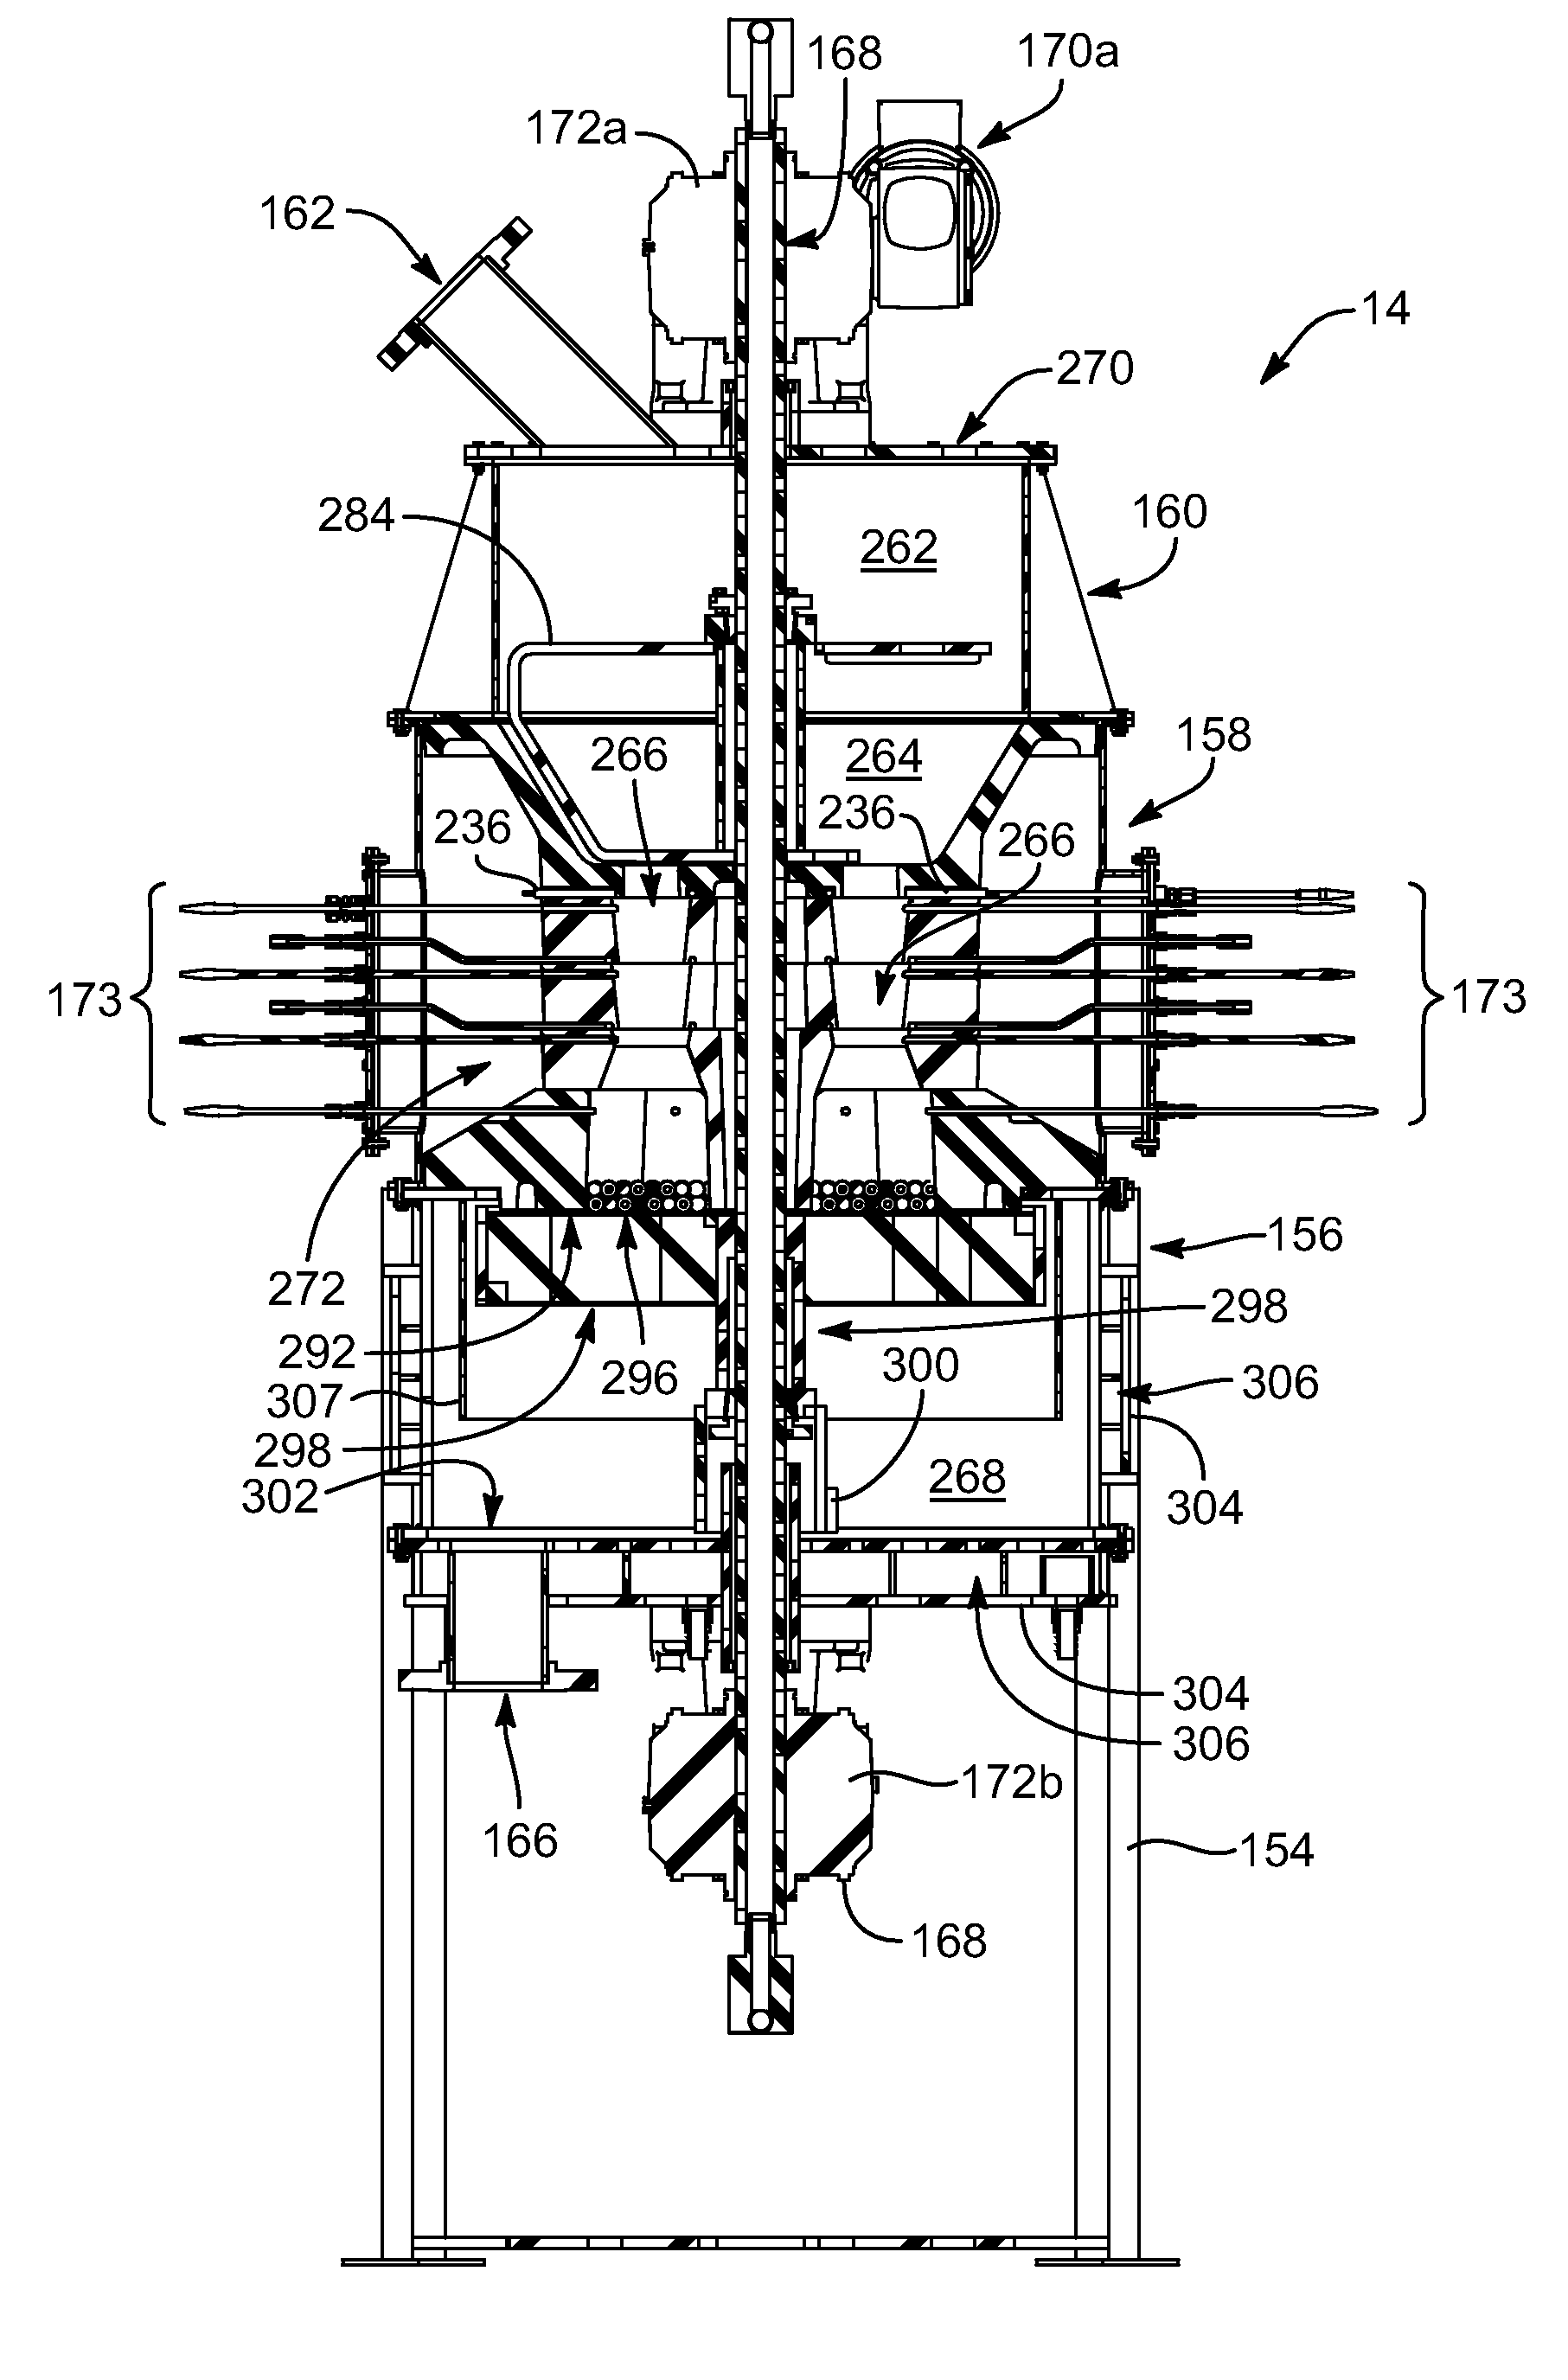 Parallel path, downdraft gasifier apparatus and method